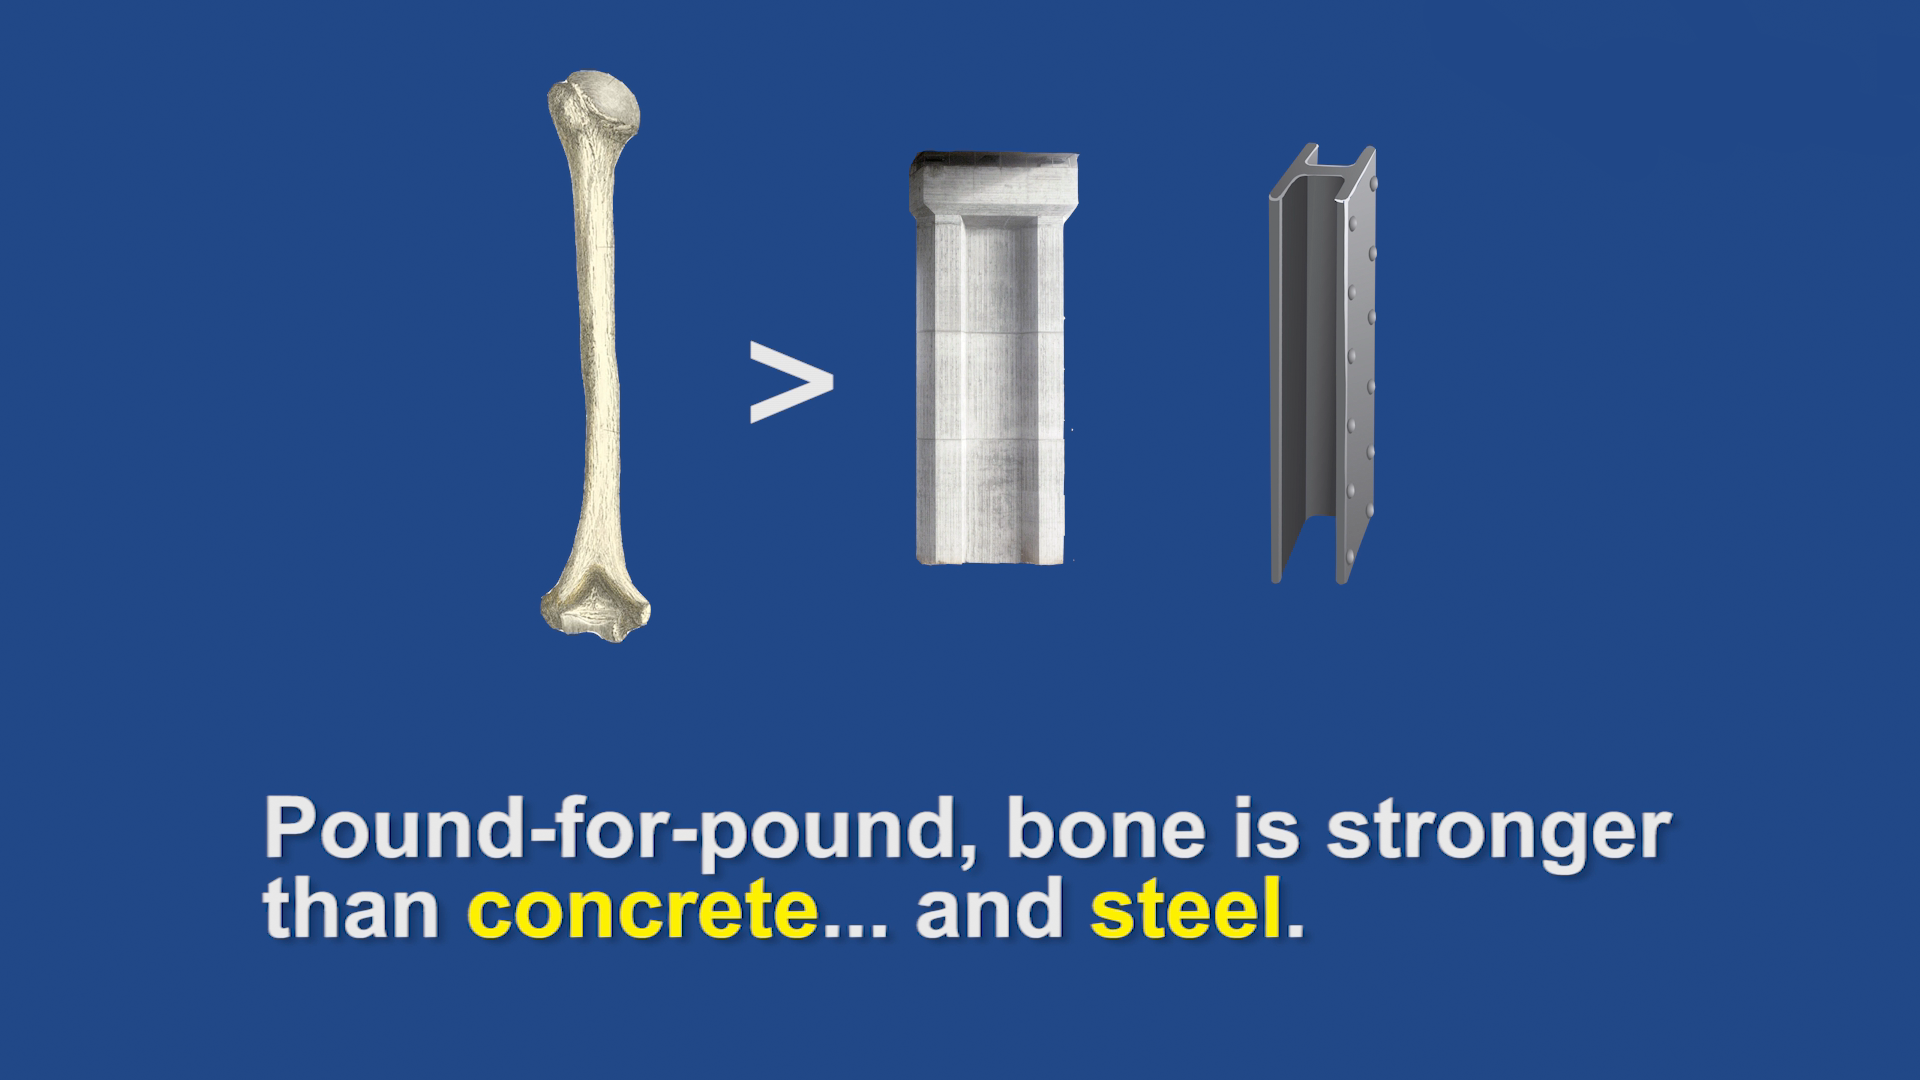 bone is stronger than concrete and steel